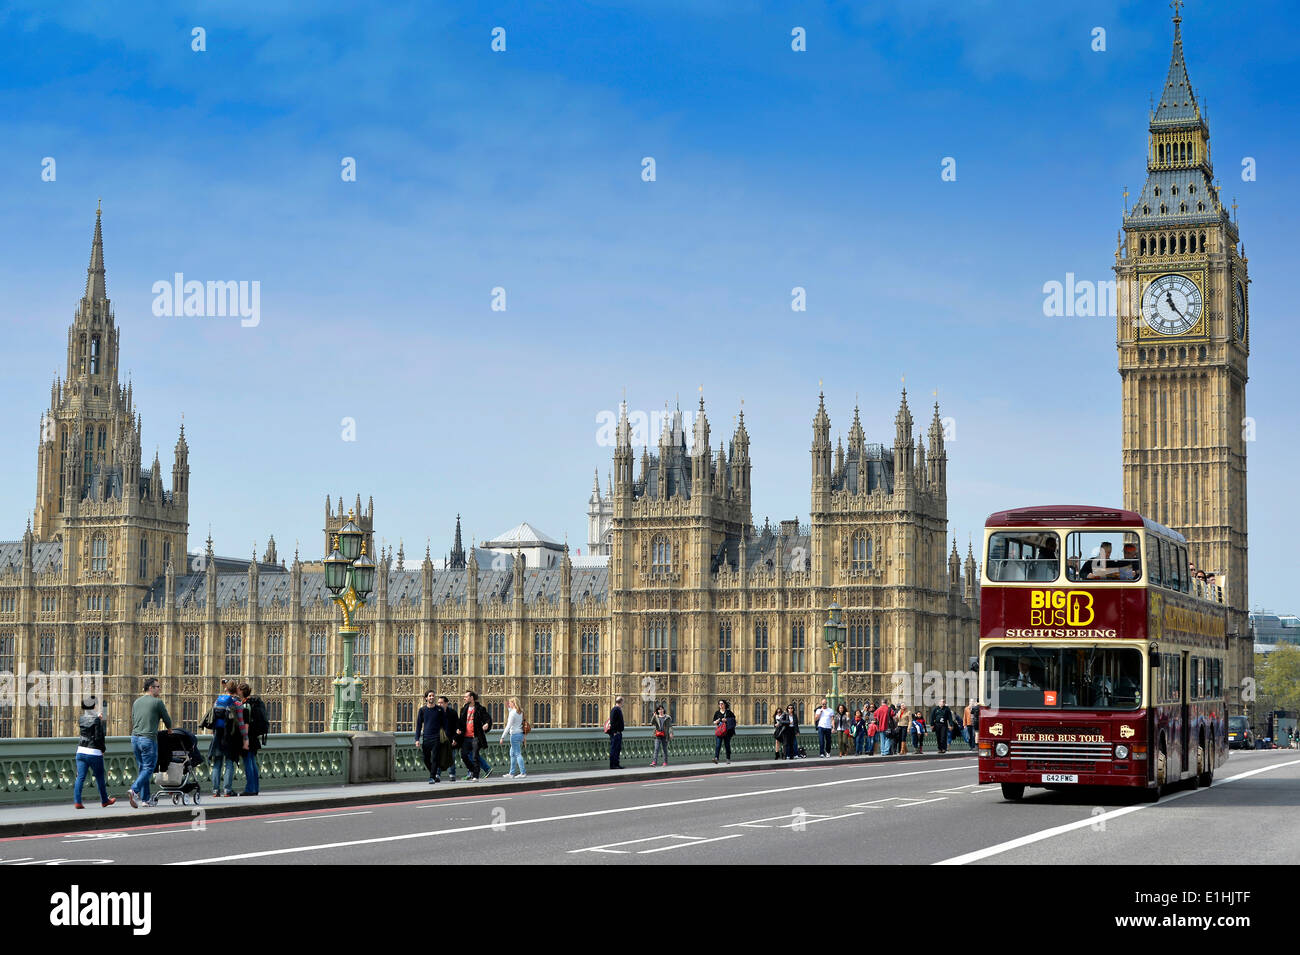 Red double-decker sightseeing bus travelling on Westminster Bridge with Big Ben or Elizabeth Tower, the Palace of Westminster or Stock Photo